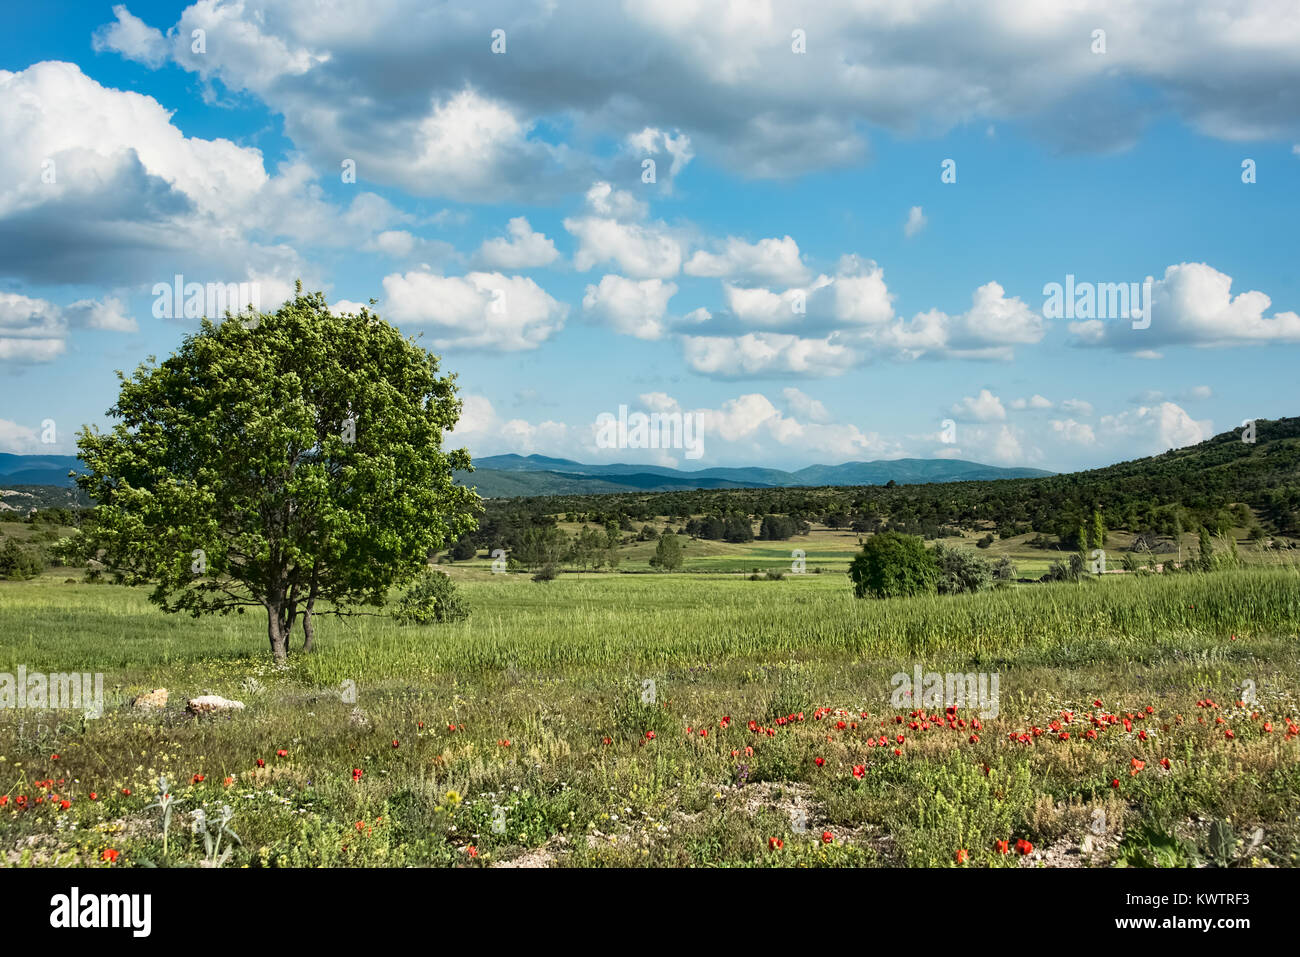 Beautiful green fields in a hilly landscape under blue skies with fluffy white clouds Stock Photo